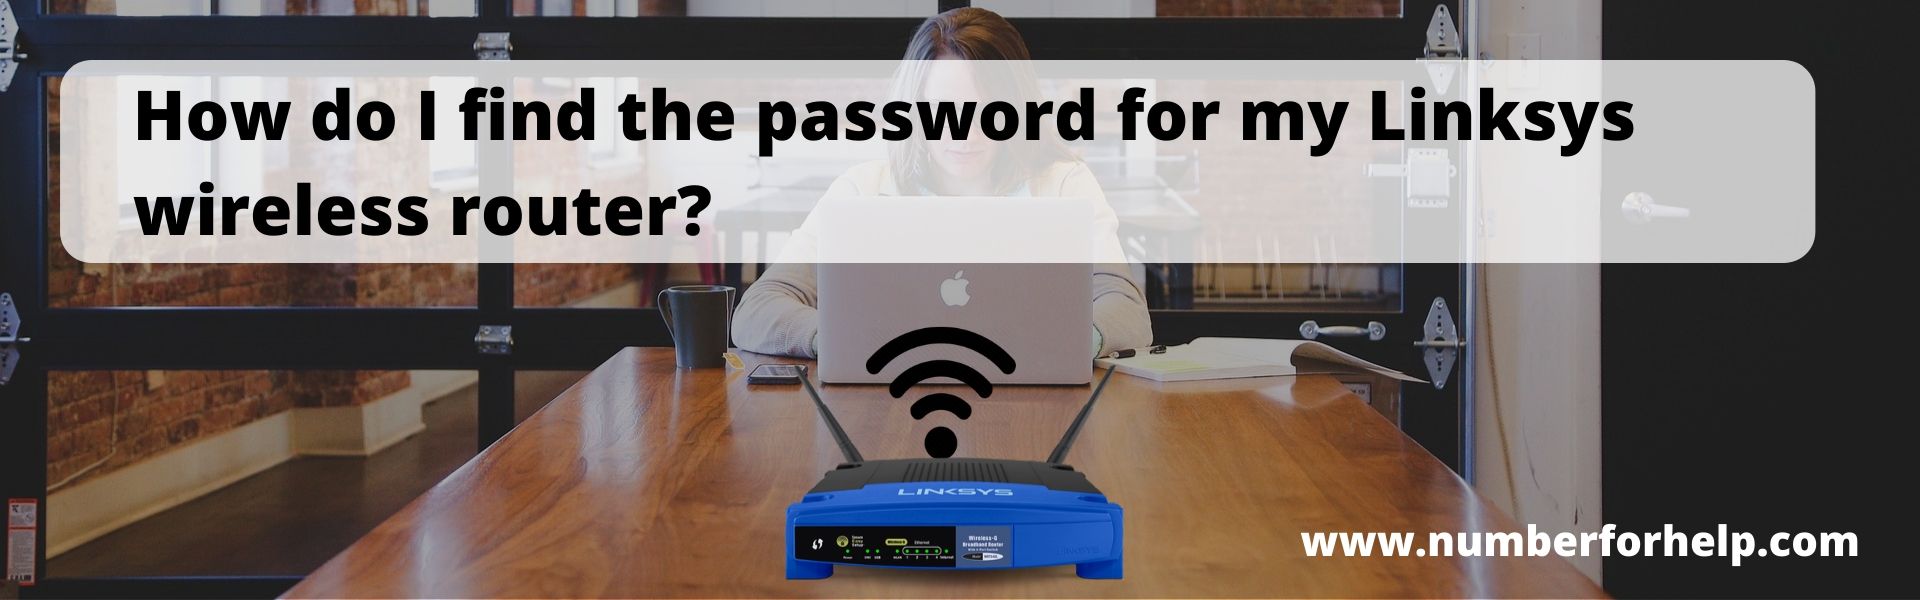 2020-01-28-01-45-18How do I find the password for my Linksys wireless router